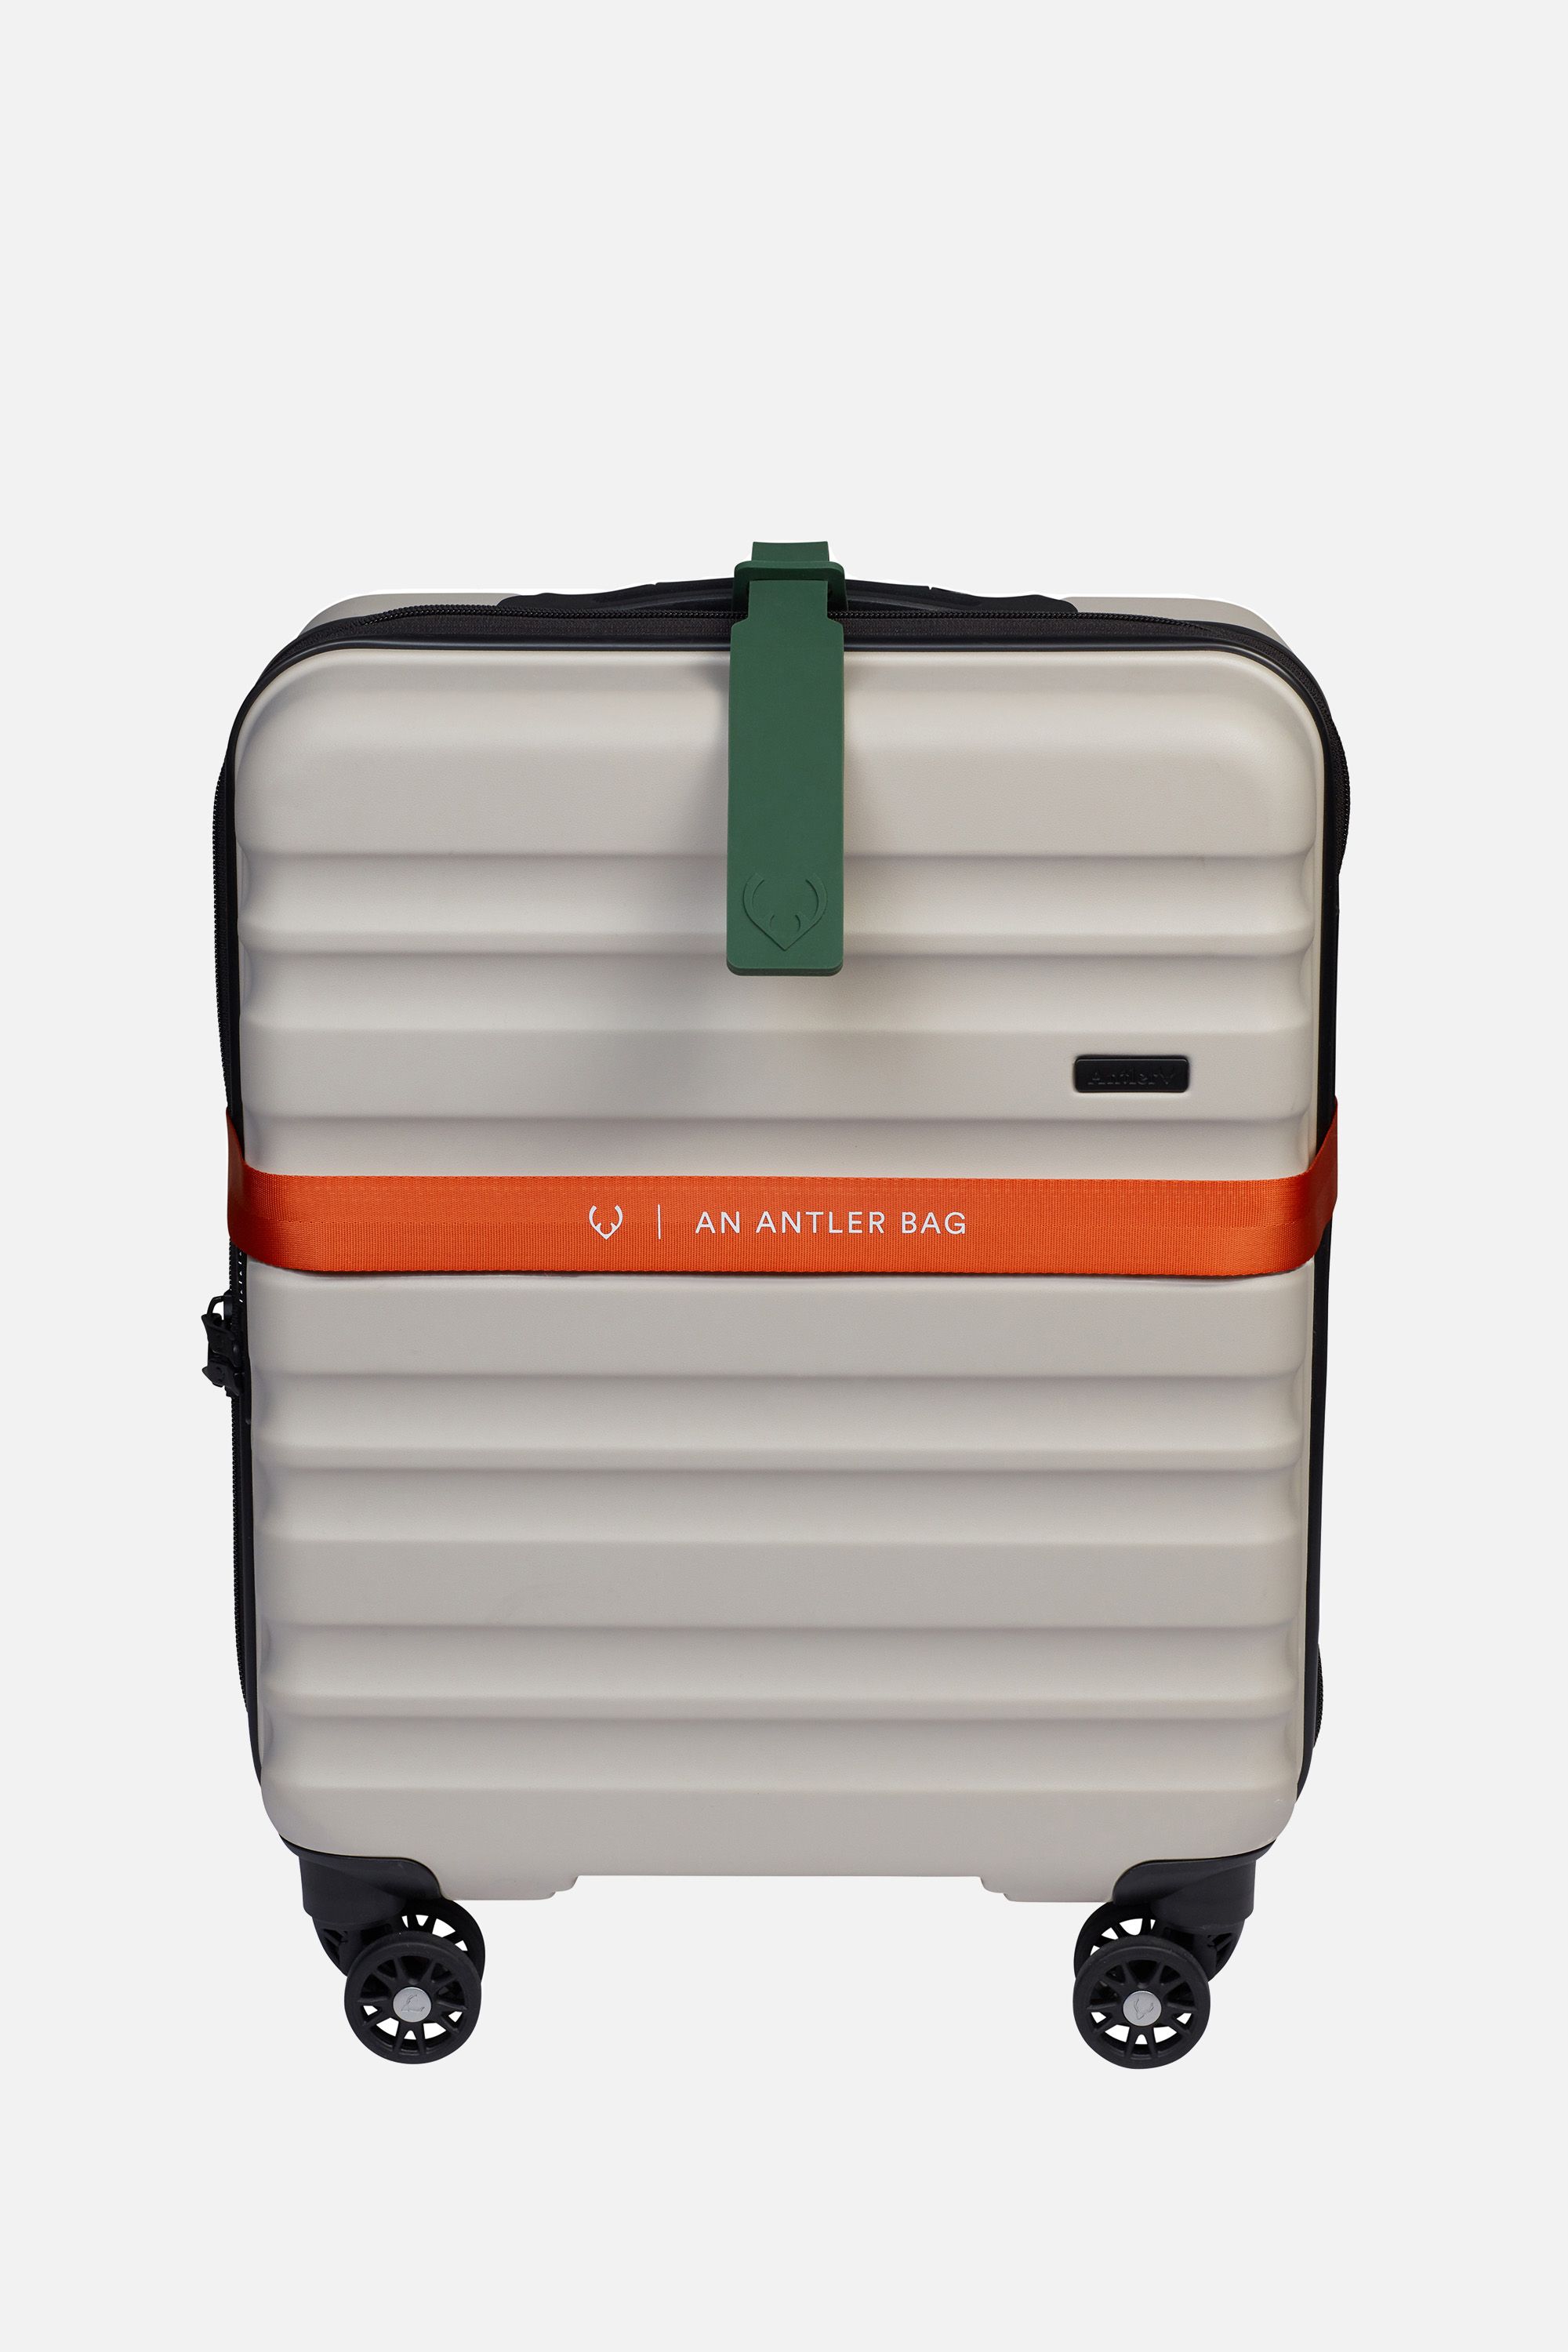 Our Top 5 Must-Have Pieces From Roam Luggage